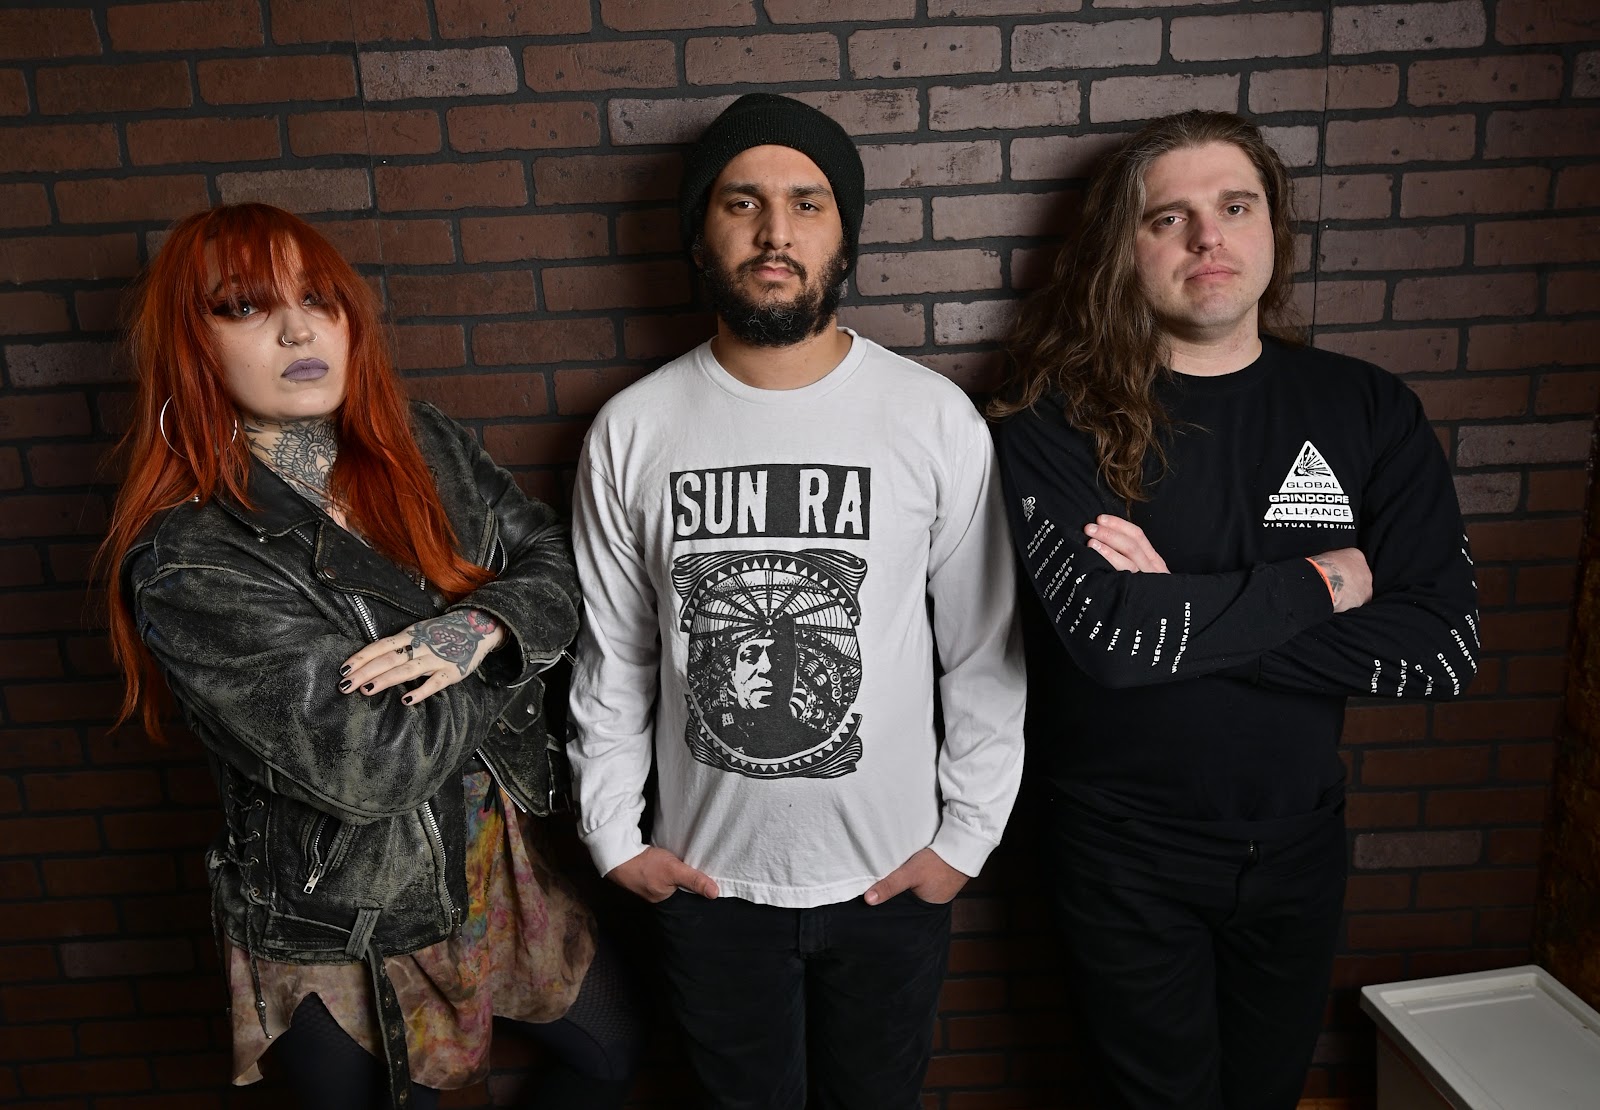 CLOUD RAT glides freely through grindcore and a range of musical